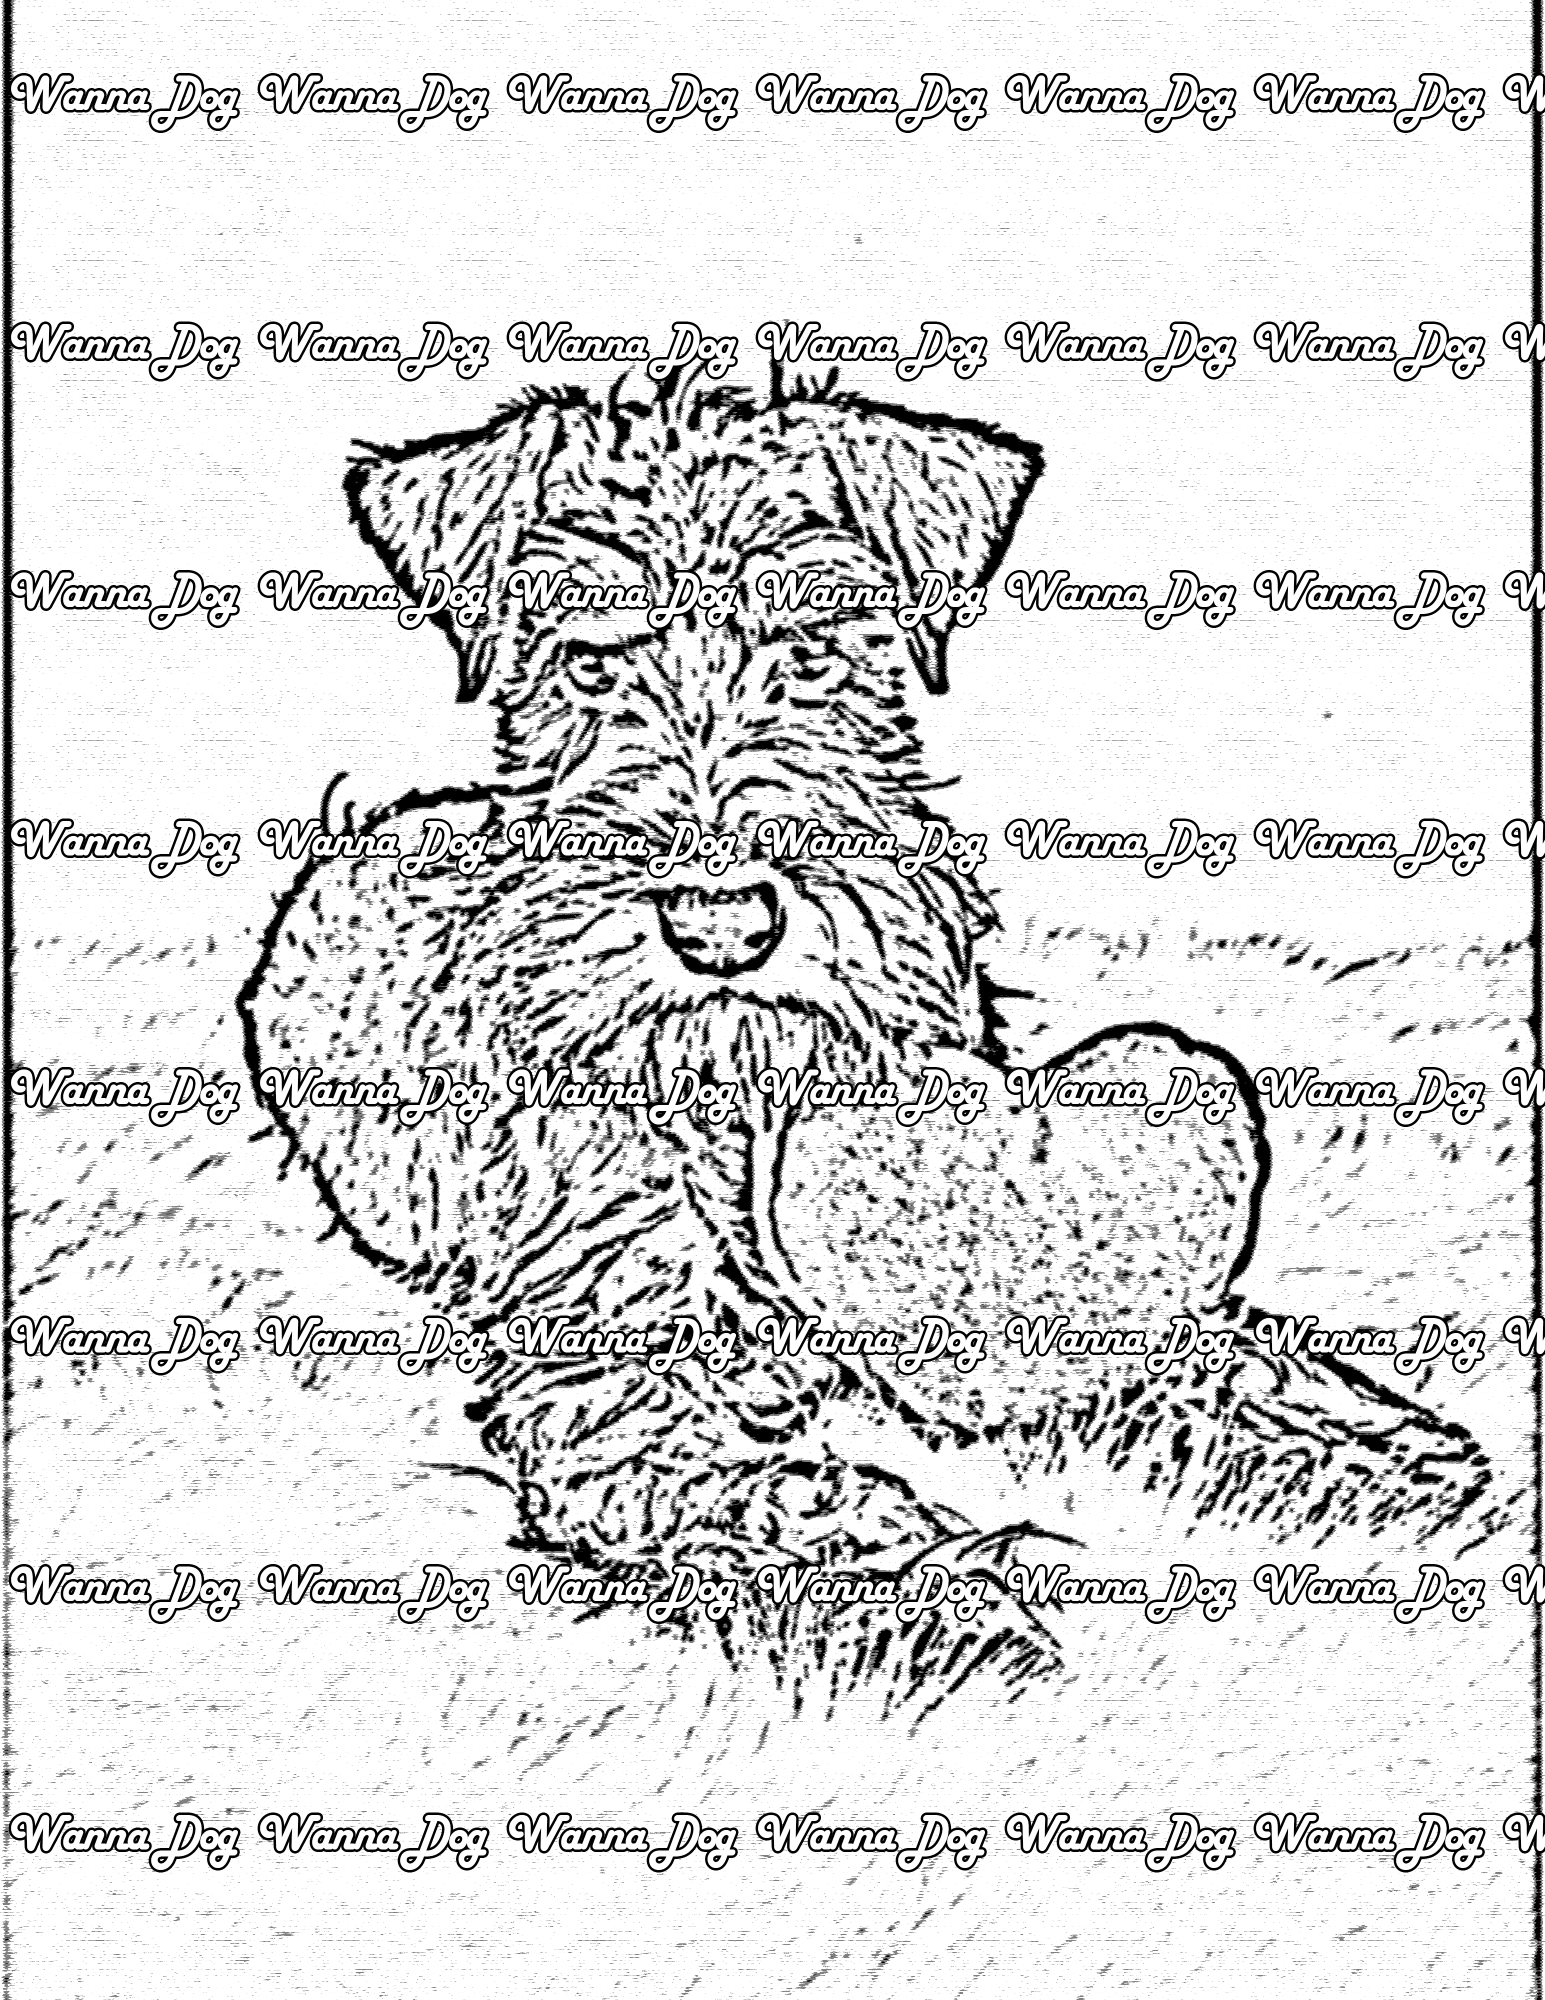 Schnauzer Coloring Page of a Schnauzer sitting with a heart-shaped pillow